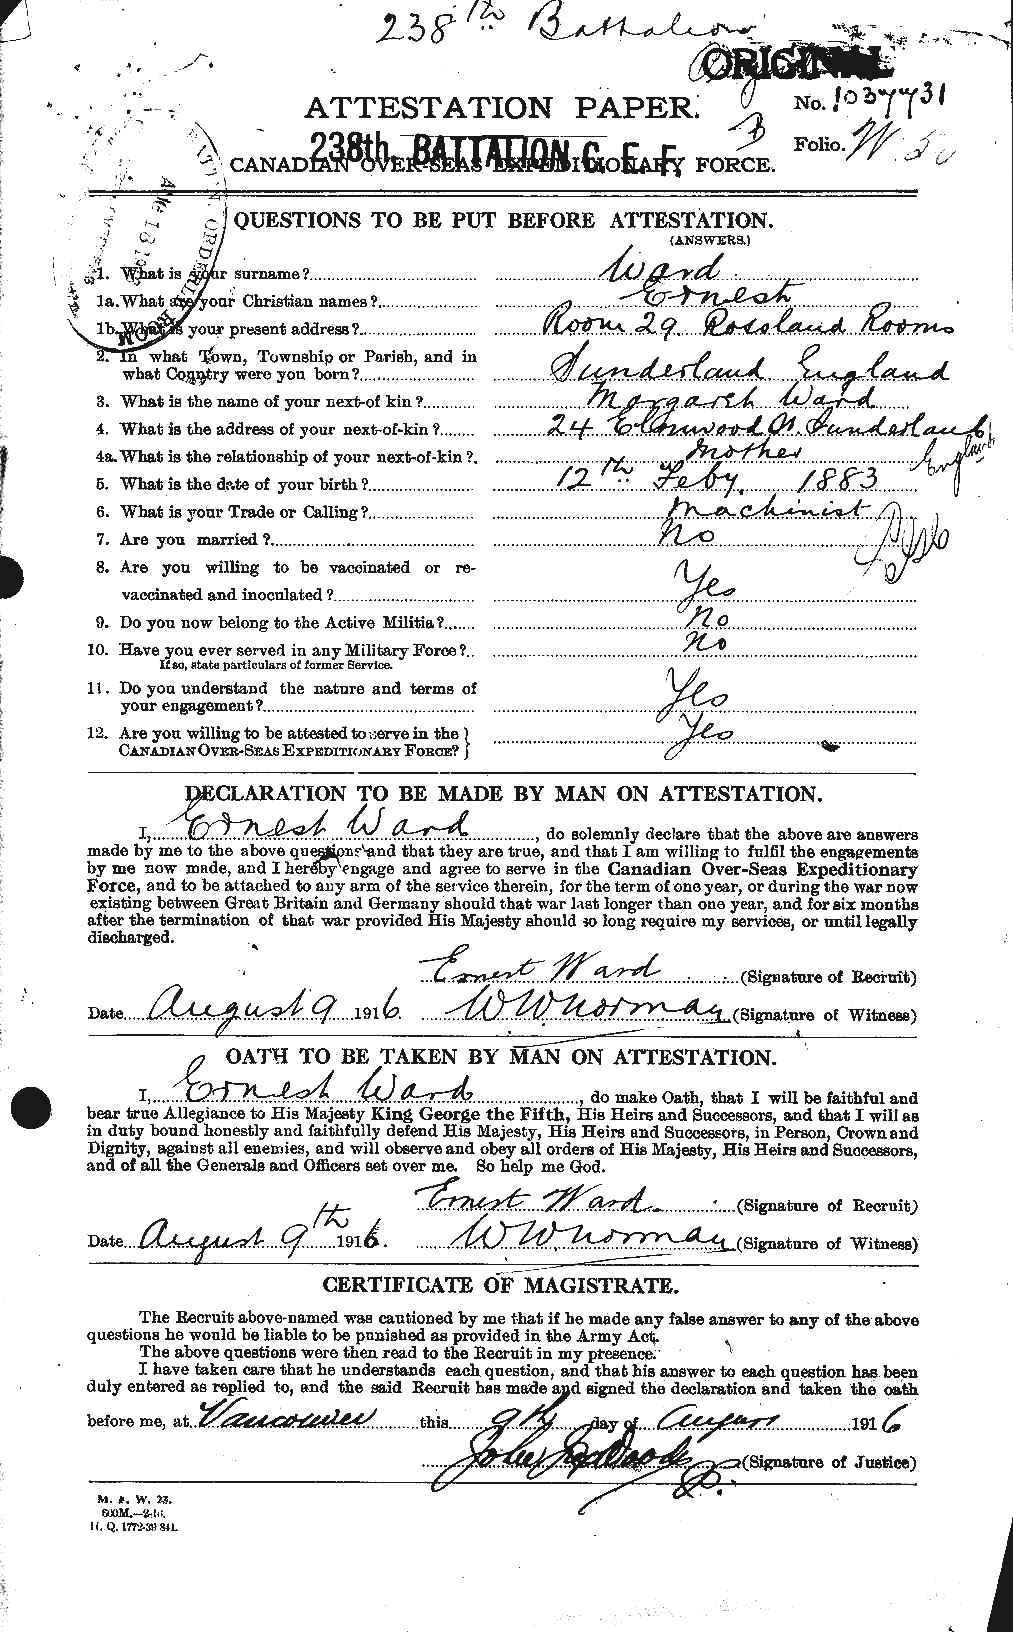 Personnel Records of the First World War - CEF 657664a